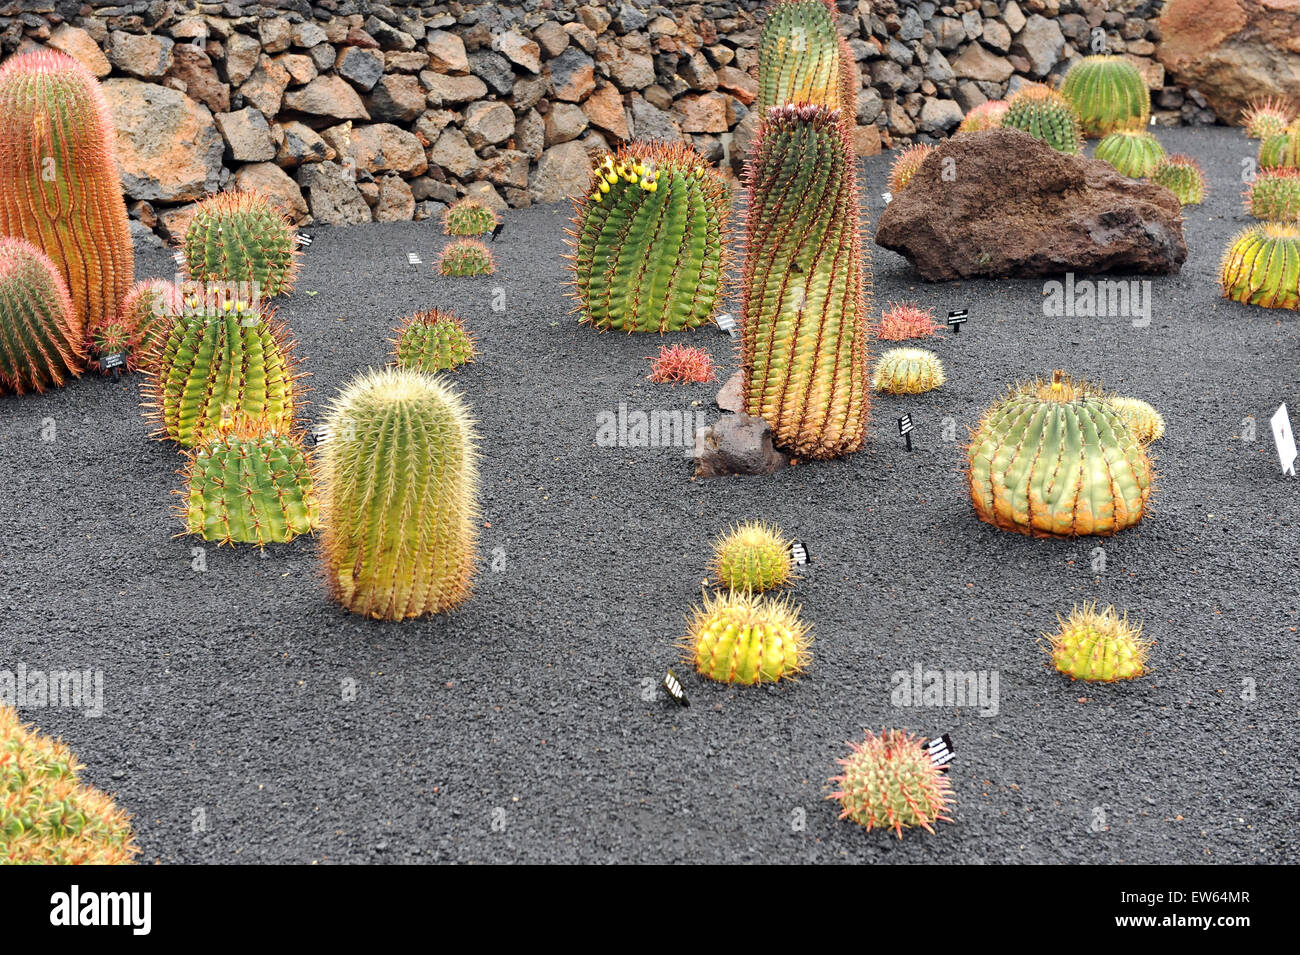 Lanzarote, Canary Islands. A selection of cactuses like cookies on a plate, growing in black sand, in a cactus park. Stock Photo